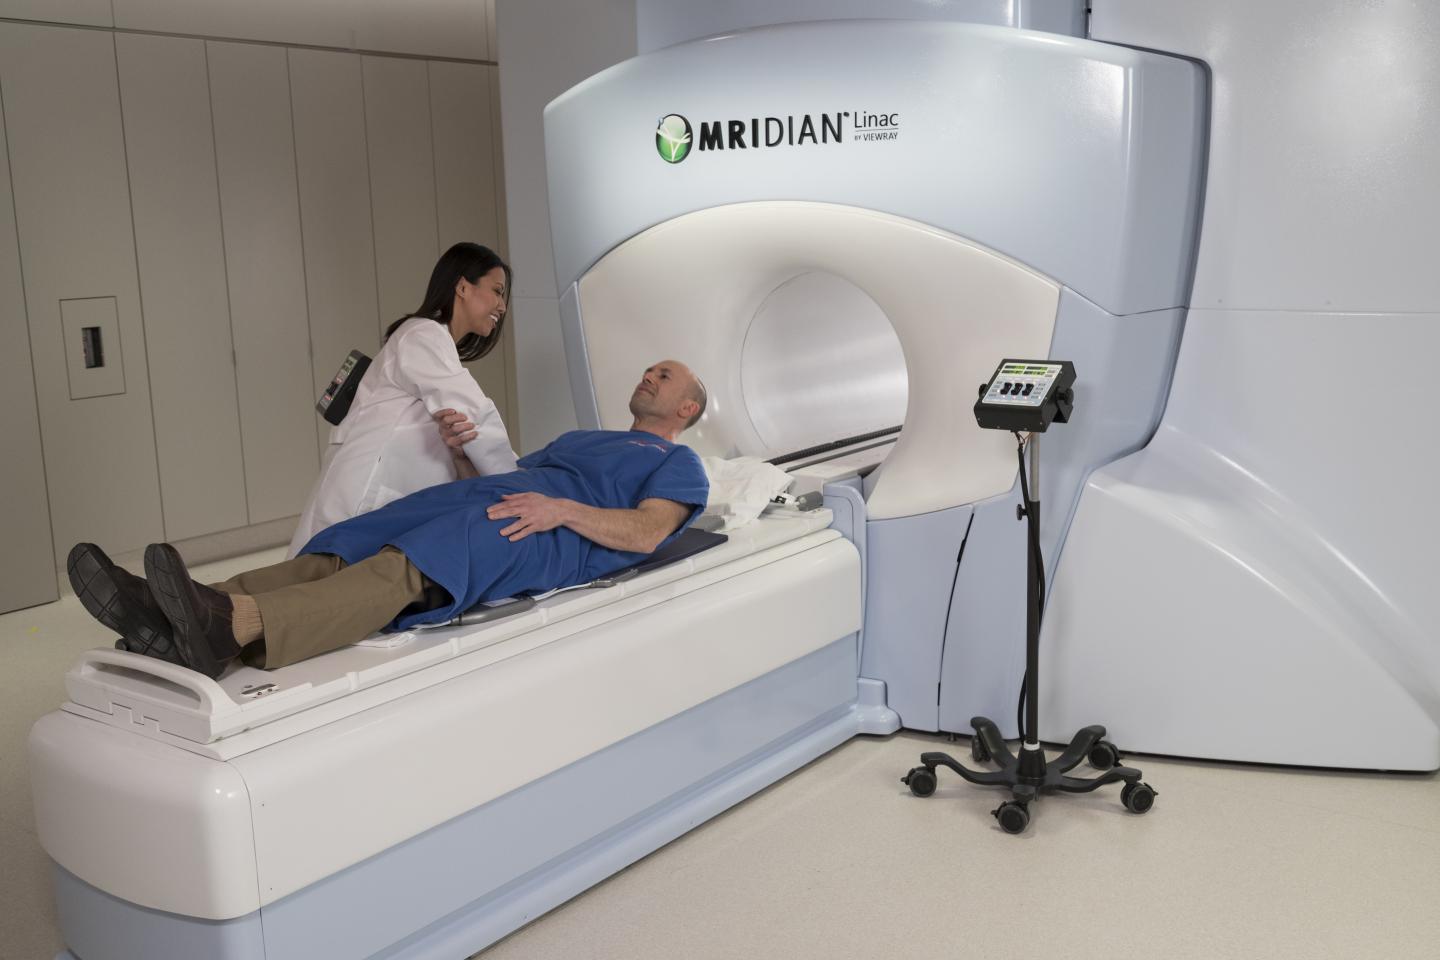 Operational MR LinAc with Patient